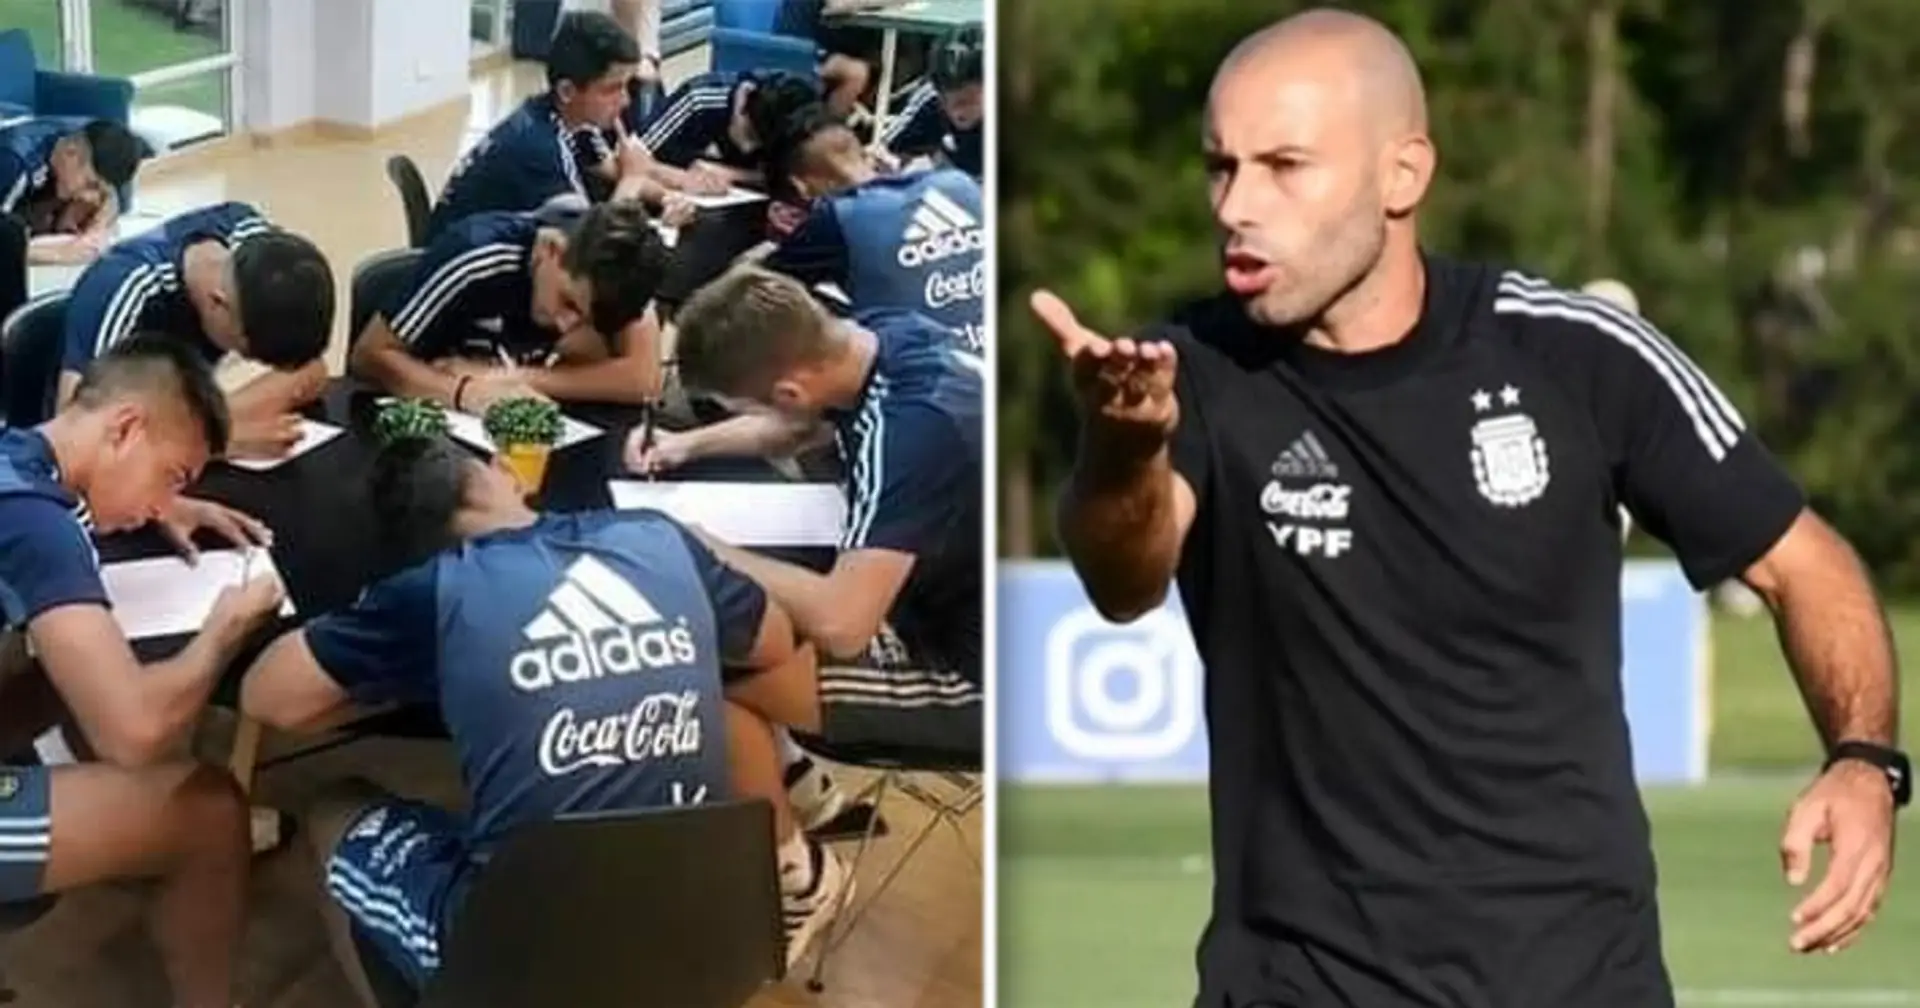 10 Rules of Mascherano: Argentina U20 manager announces his off-the-pitch rules to players